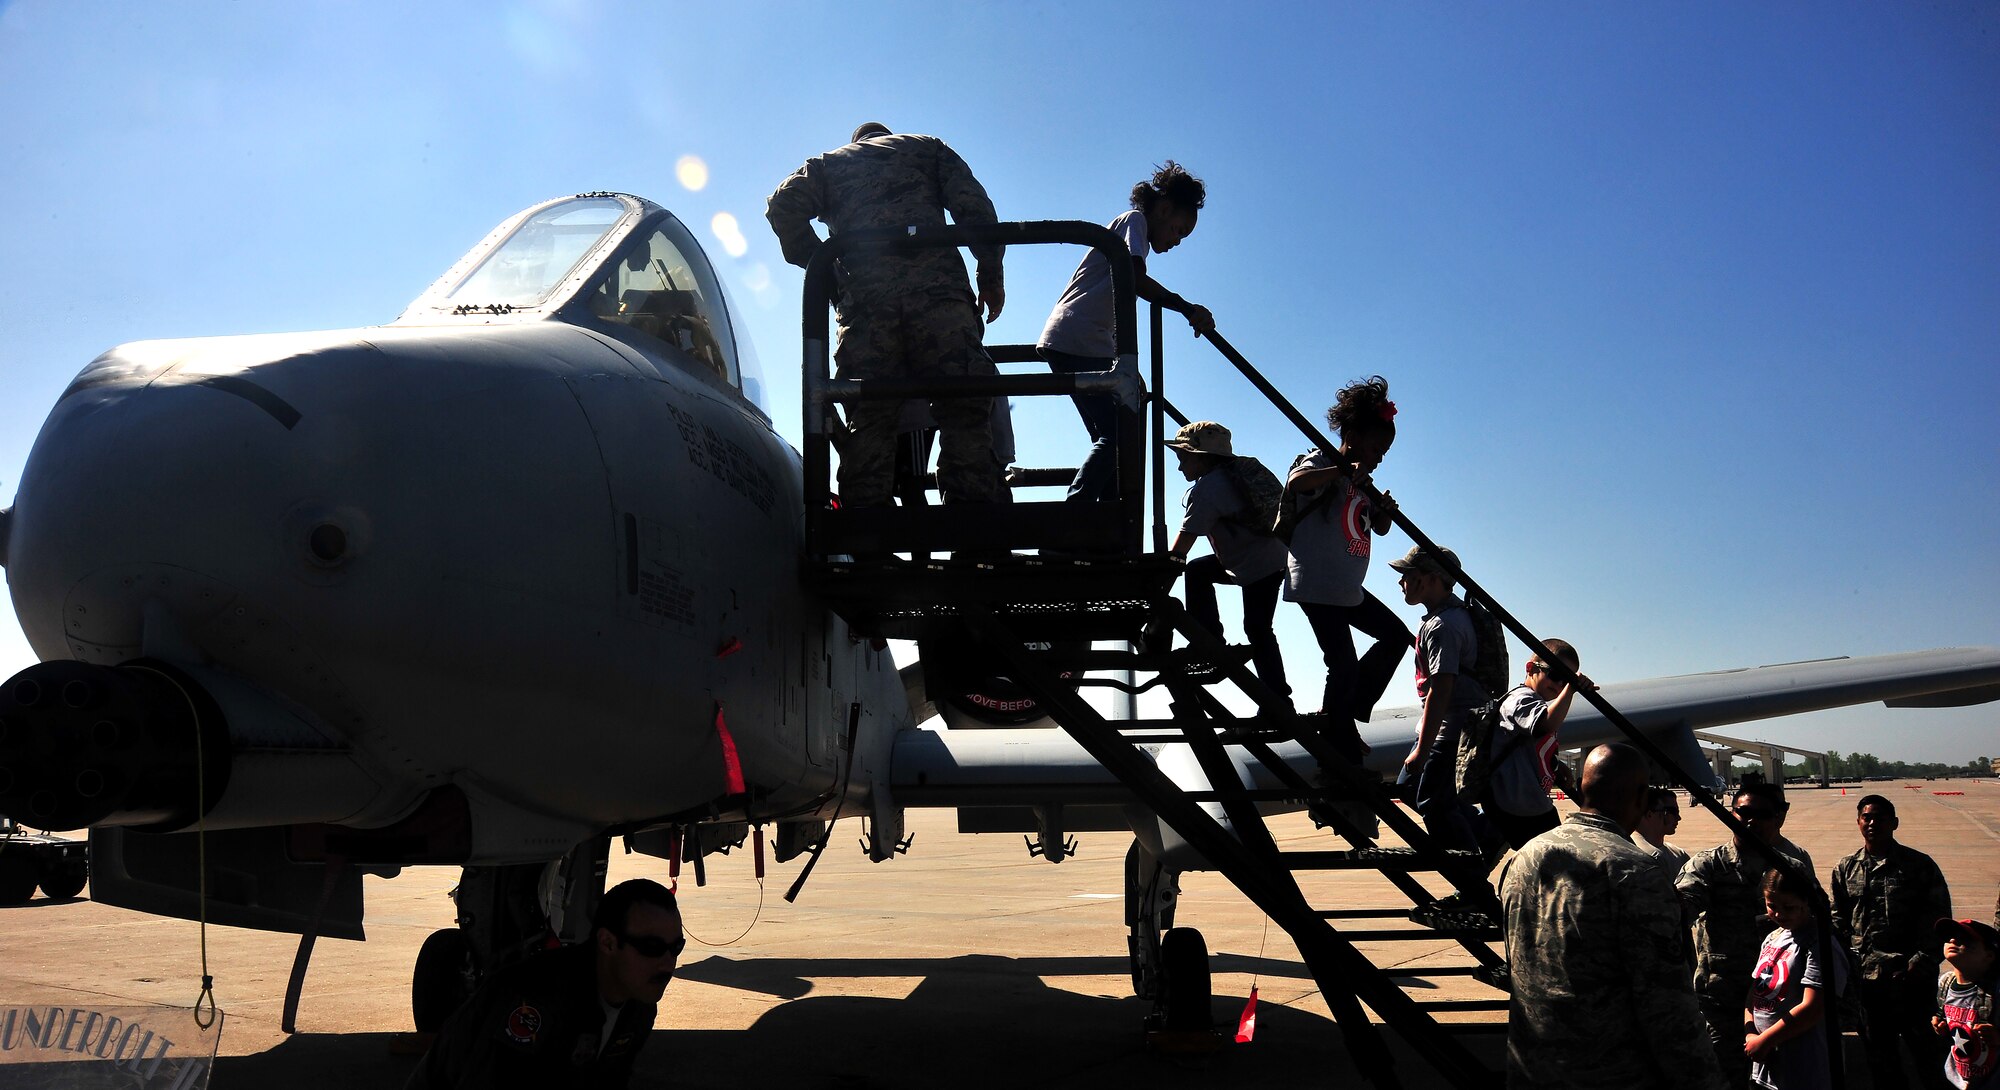 Operation Spirit participants take turns viewing an A-10 Thunderbolt II during Operation Spirit at Whiteman Air Force Base, Mo., April 23, 2016. During the event multiple aircraft were on display including an A-10, B-2 Spirit and T-38 Talon. (U.S. Air Force photo by Senior Airman Jovan Banks) 